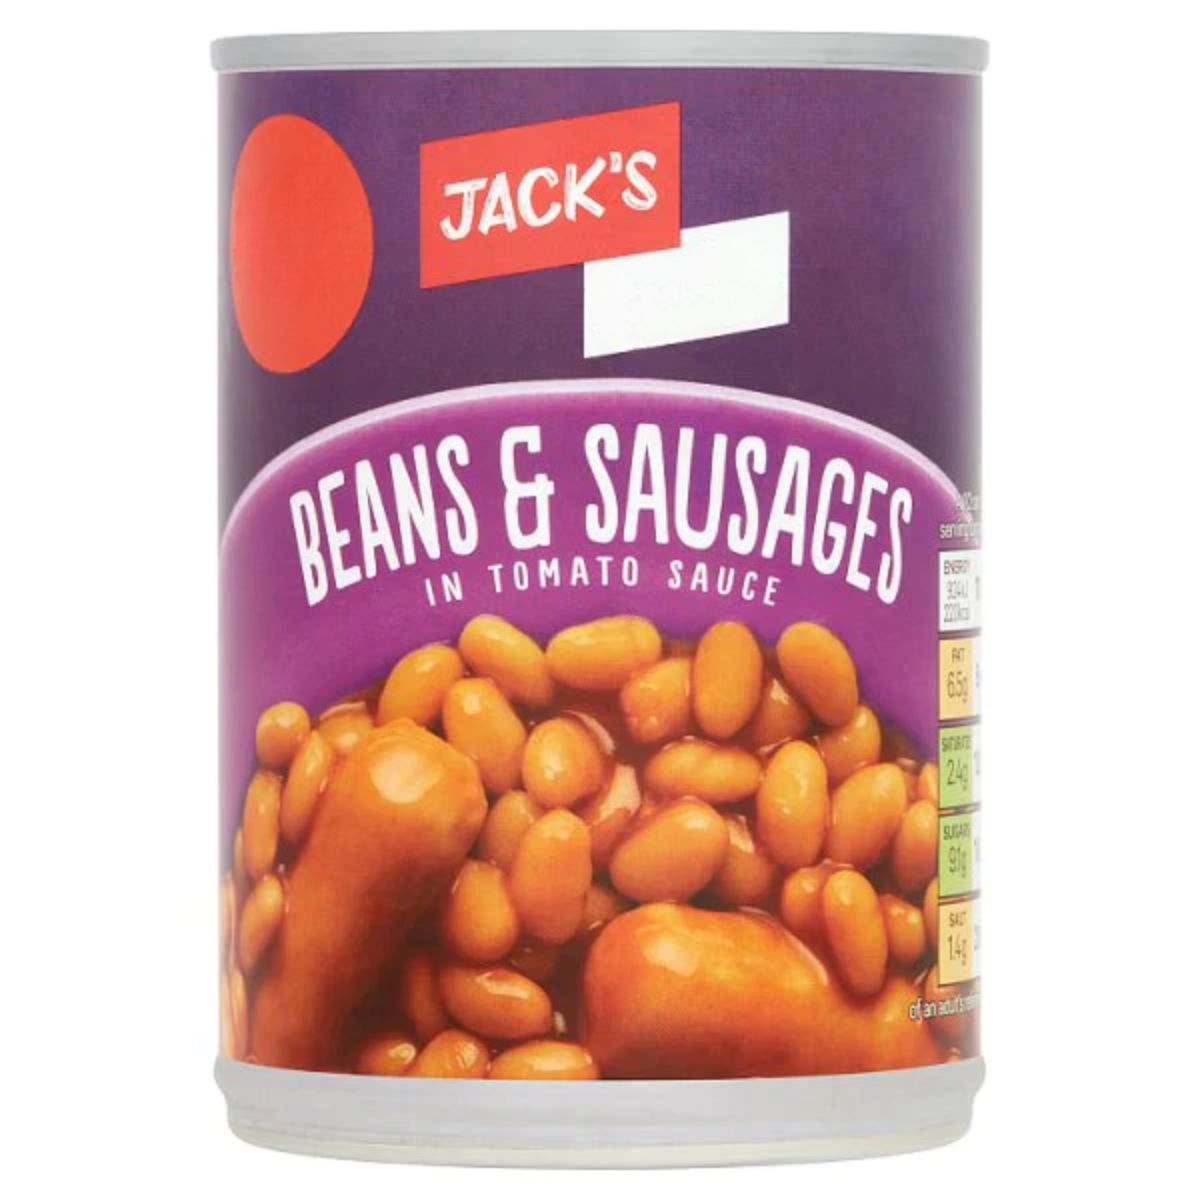 Jacks - Beans & Sausages in Tomato Sauce - 395g in a can.